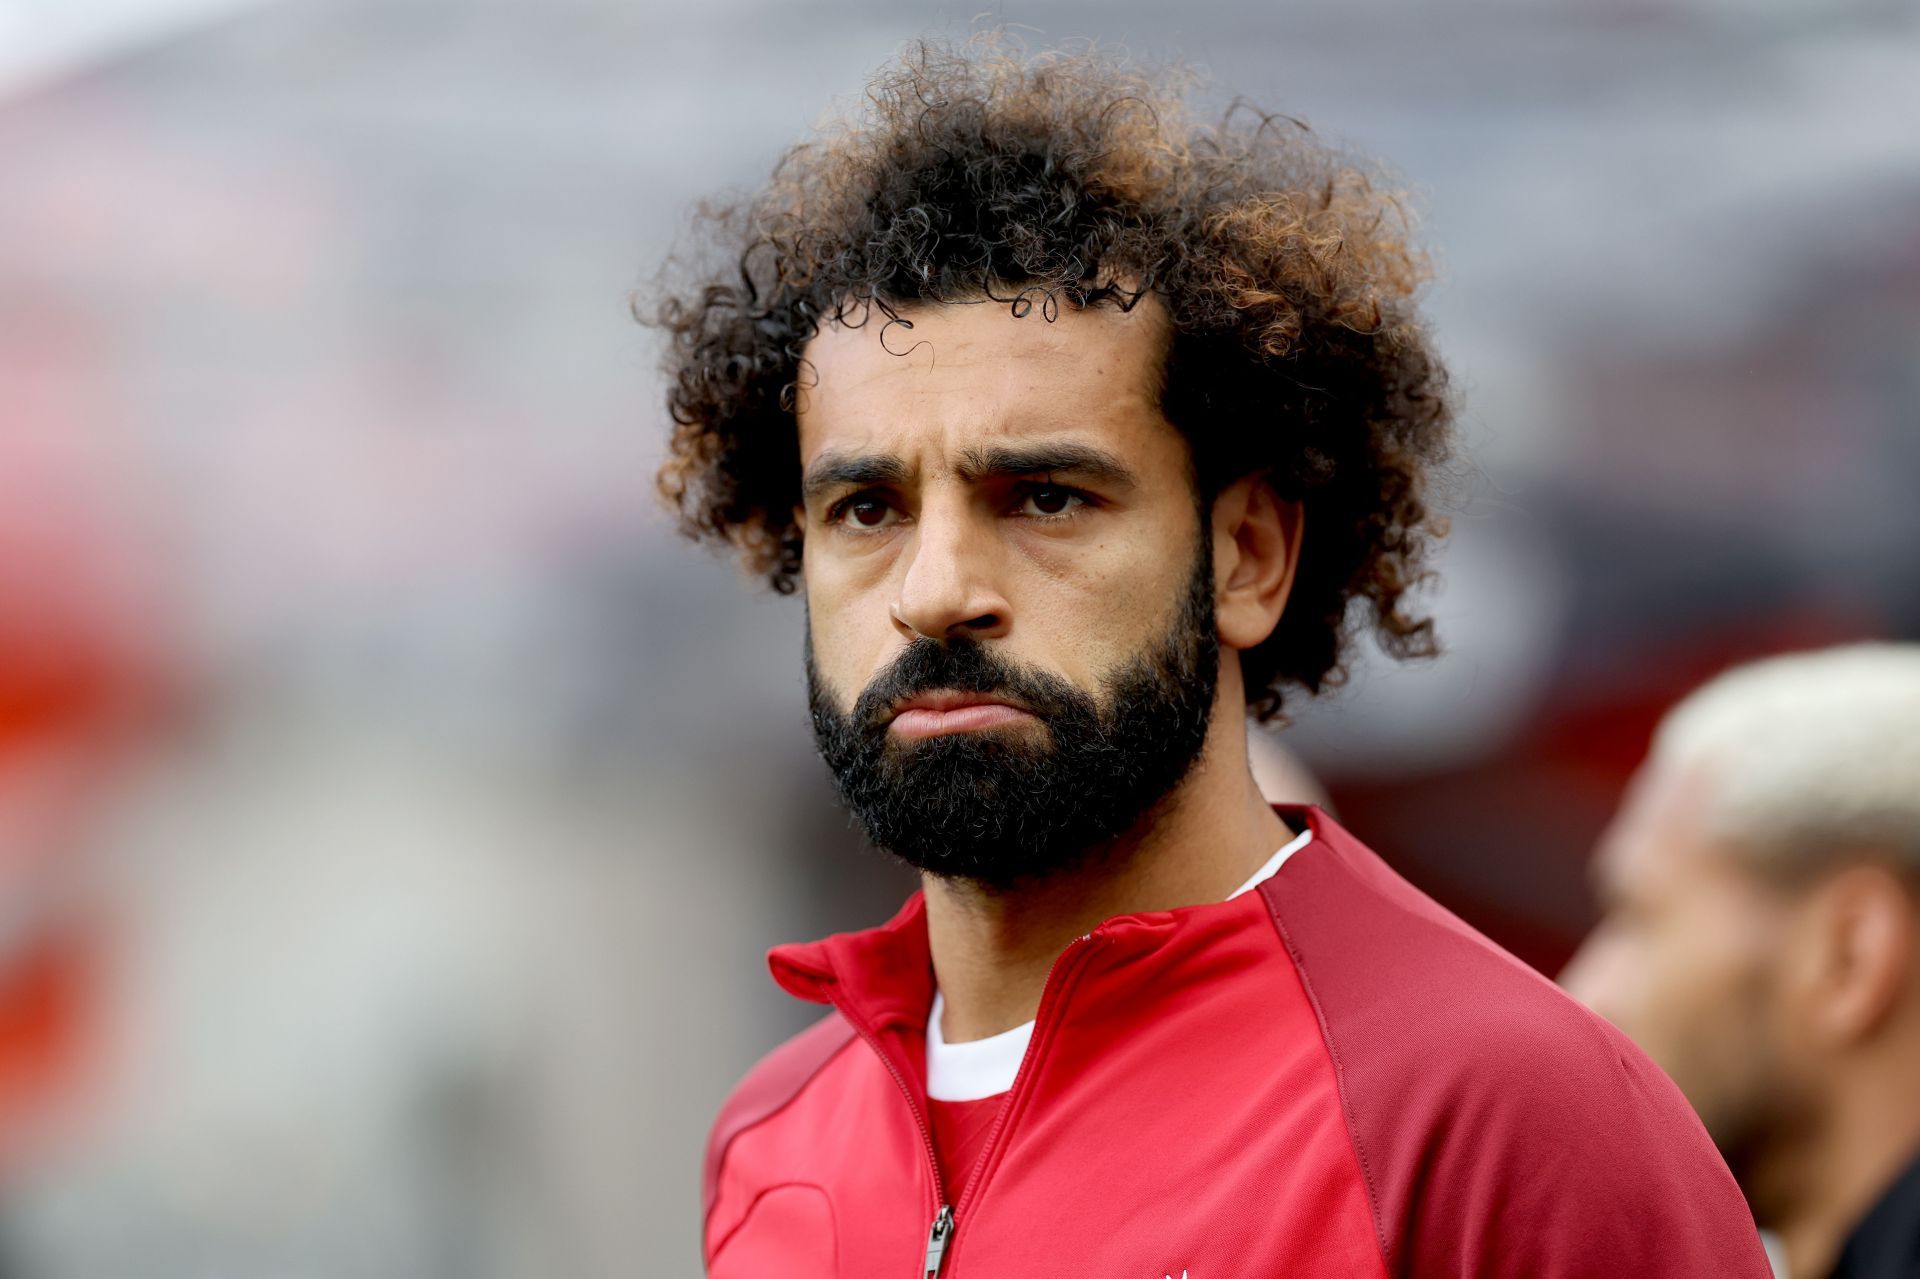 Salah is the poster boy of Liverpool